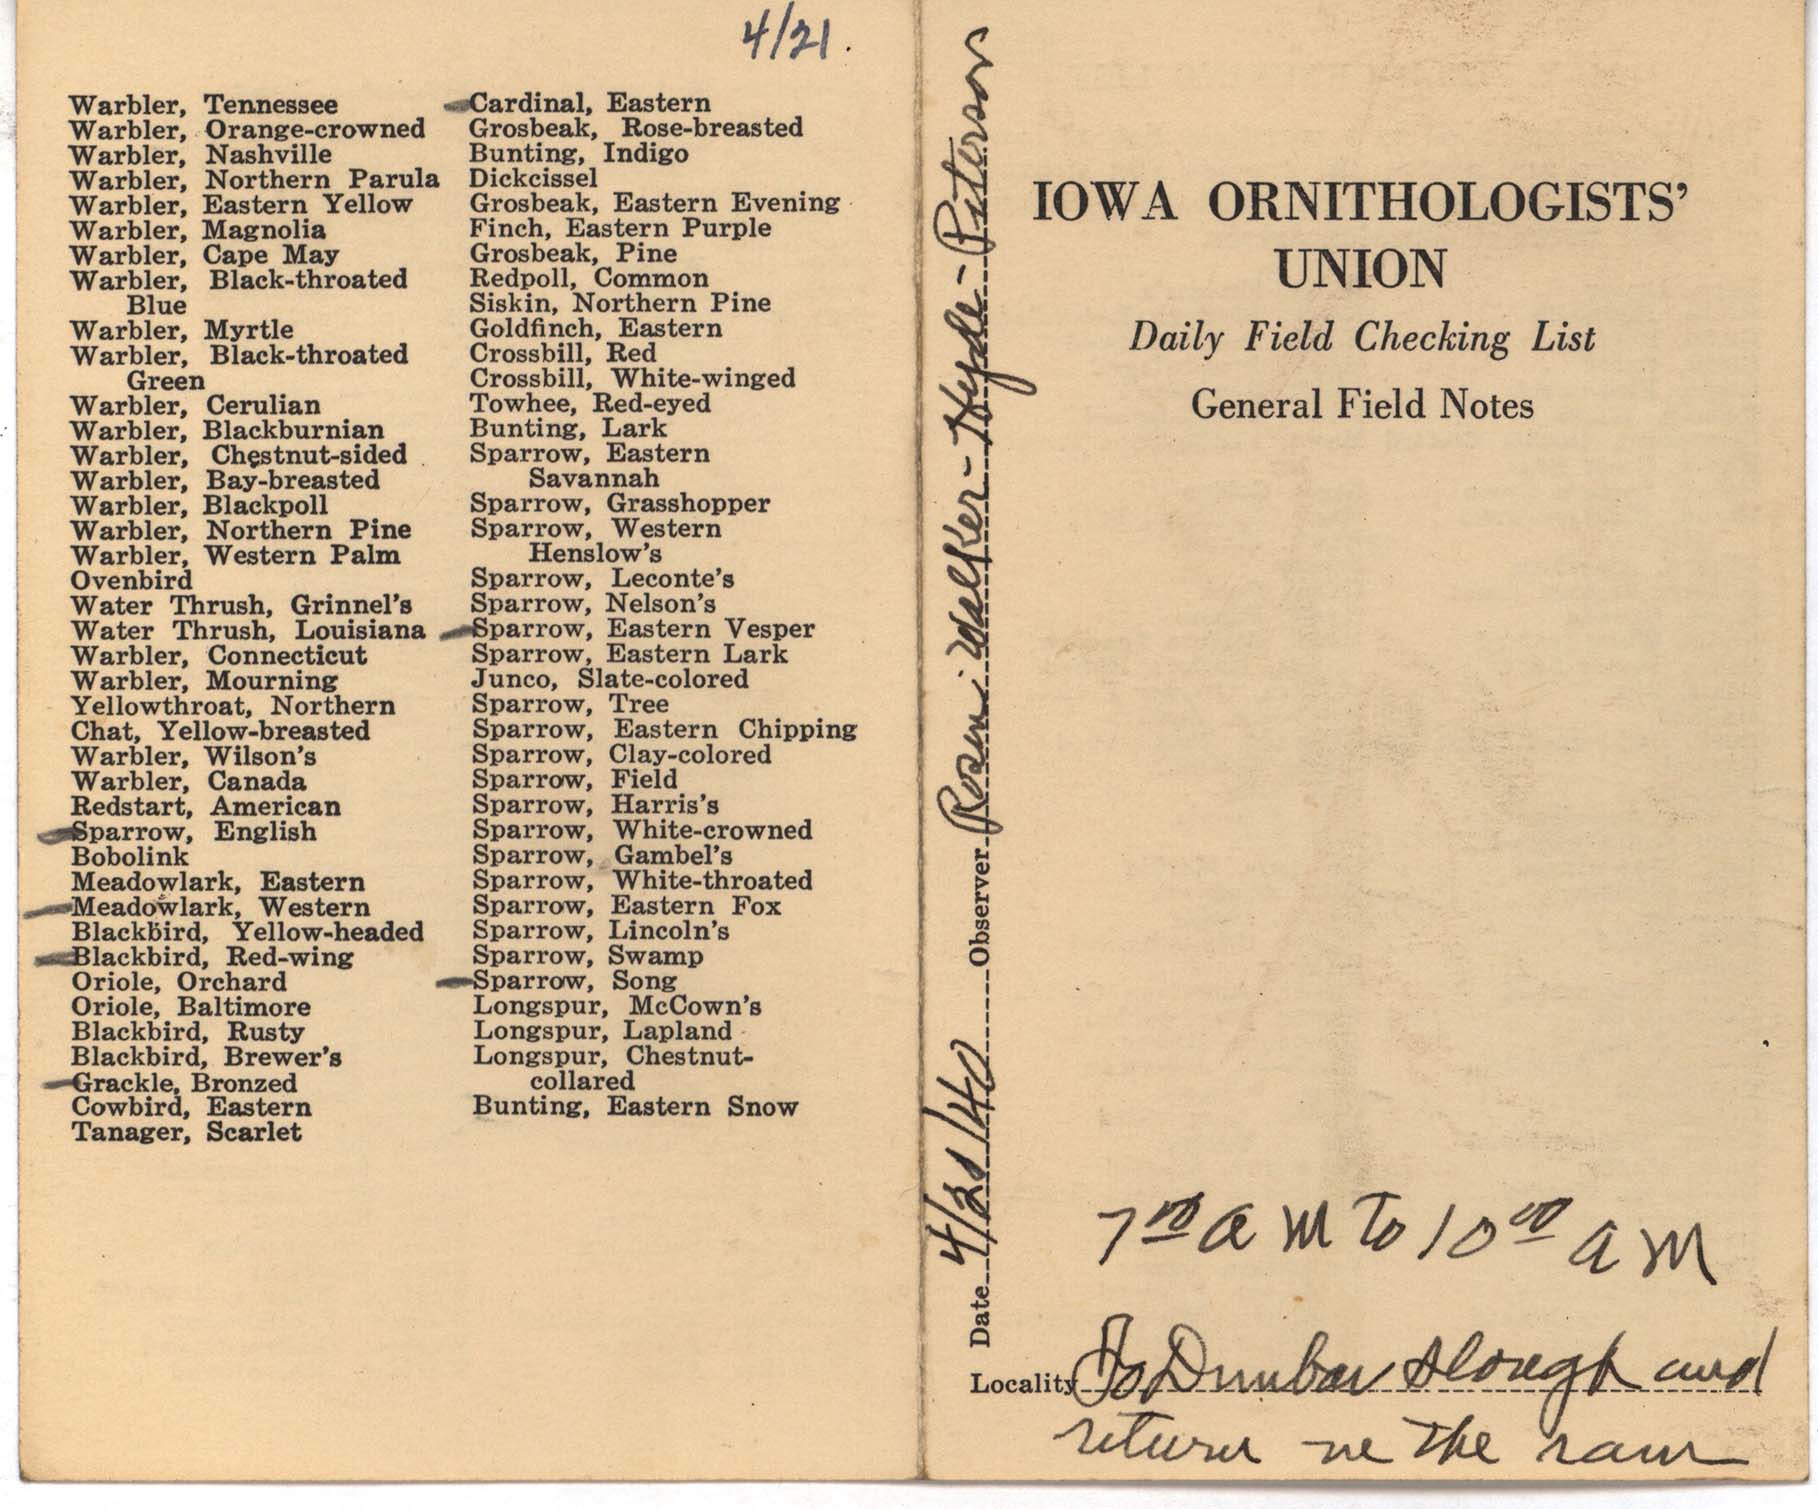 Daily field checking list by Walter Rosene, April 21, 1940